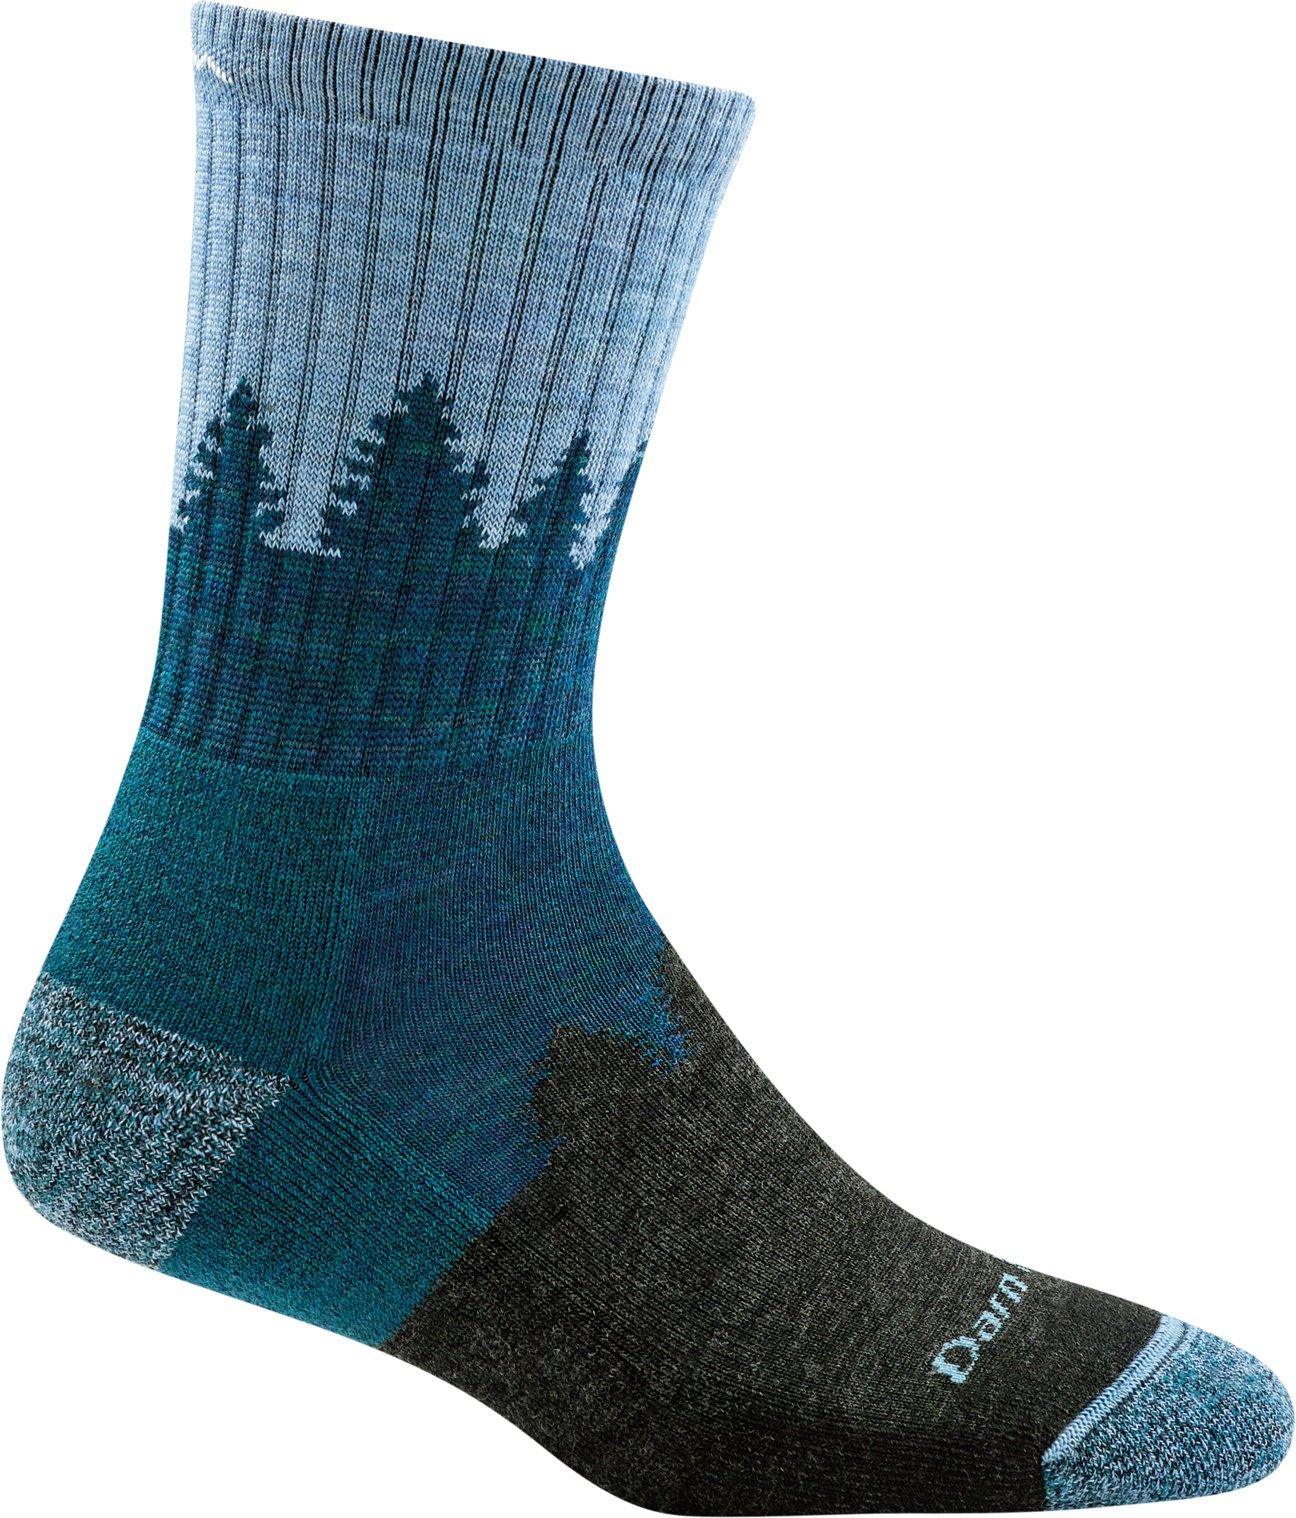 Treeline, Women's Midweight Micro Crew with Cushion #1971 - Darn Tough - The Sock Monster